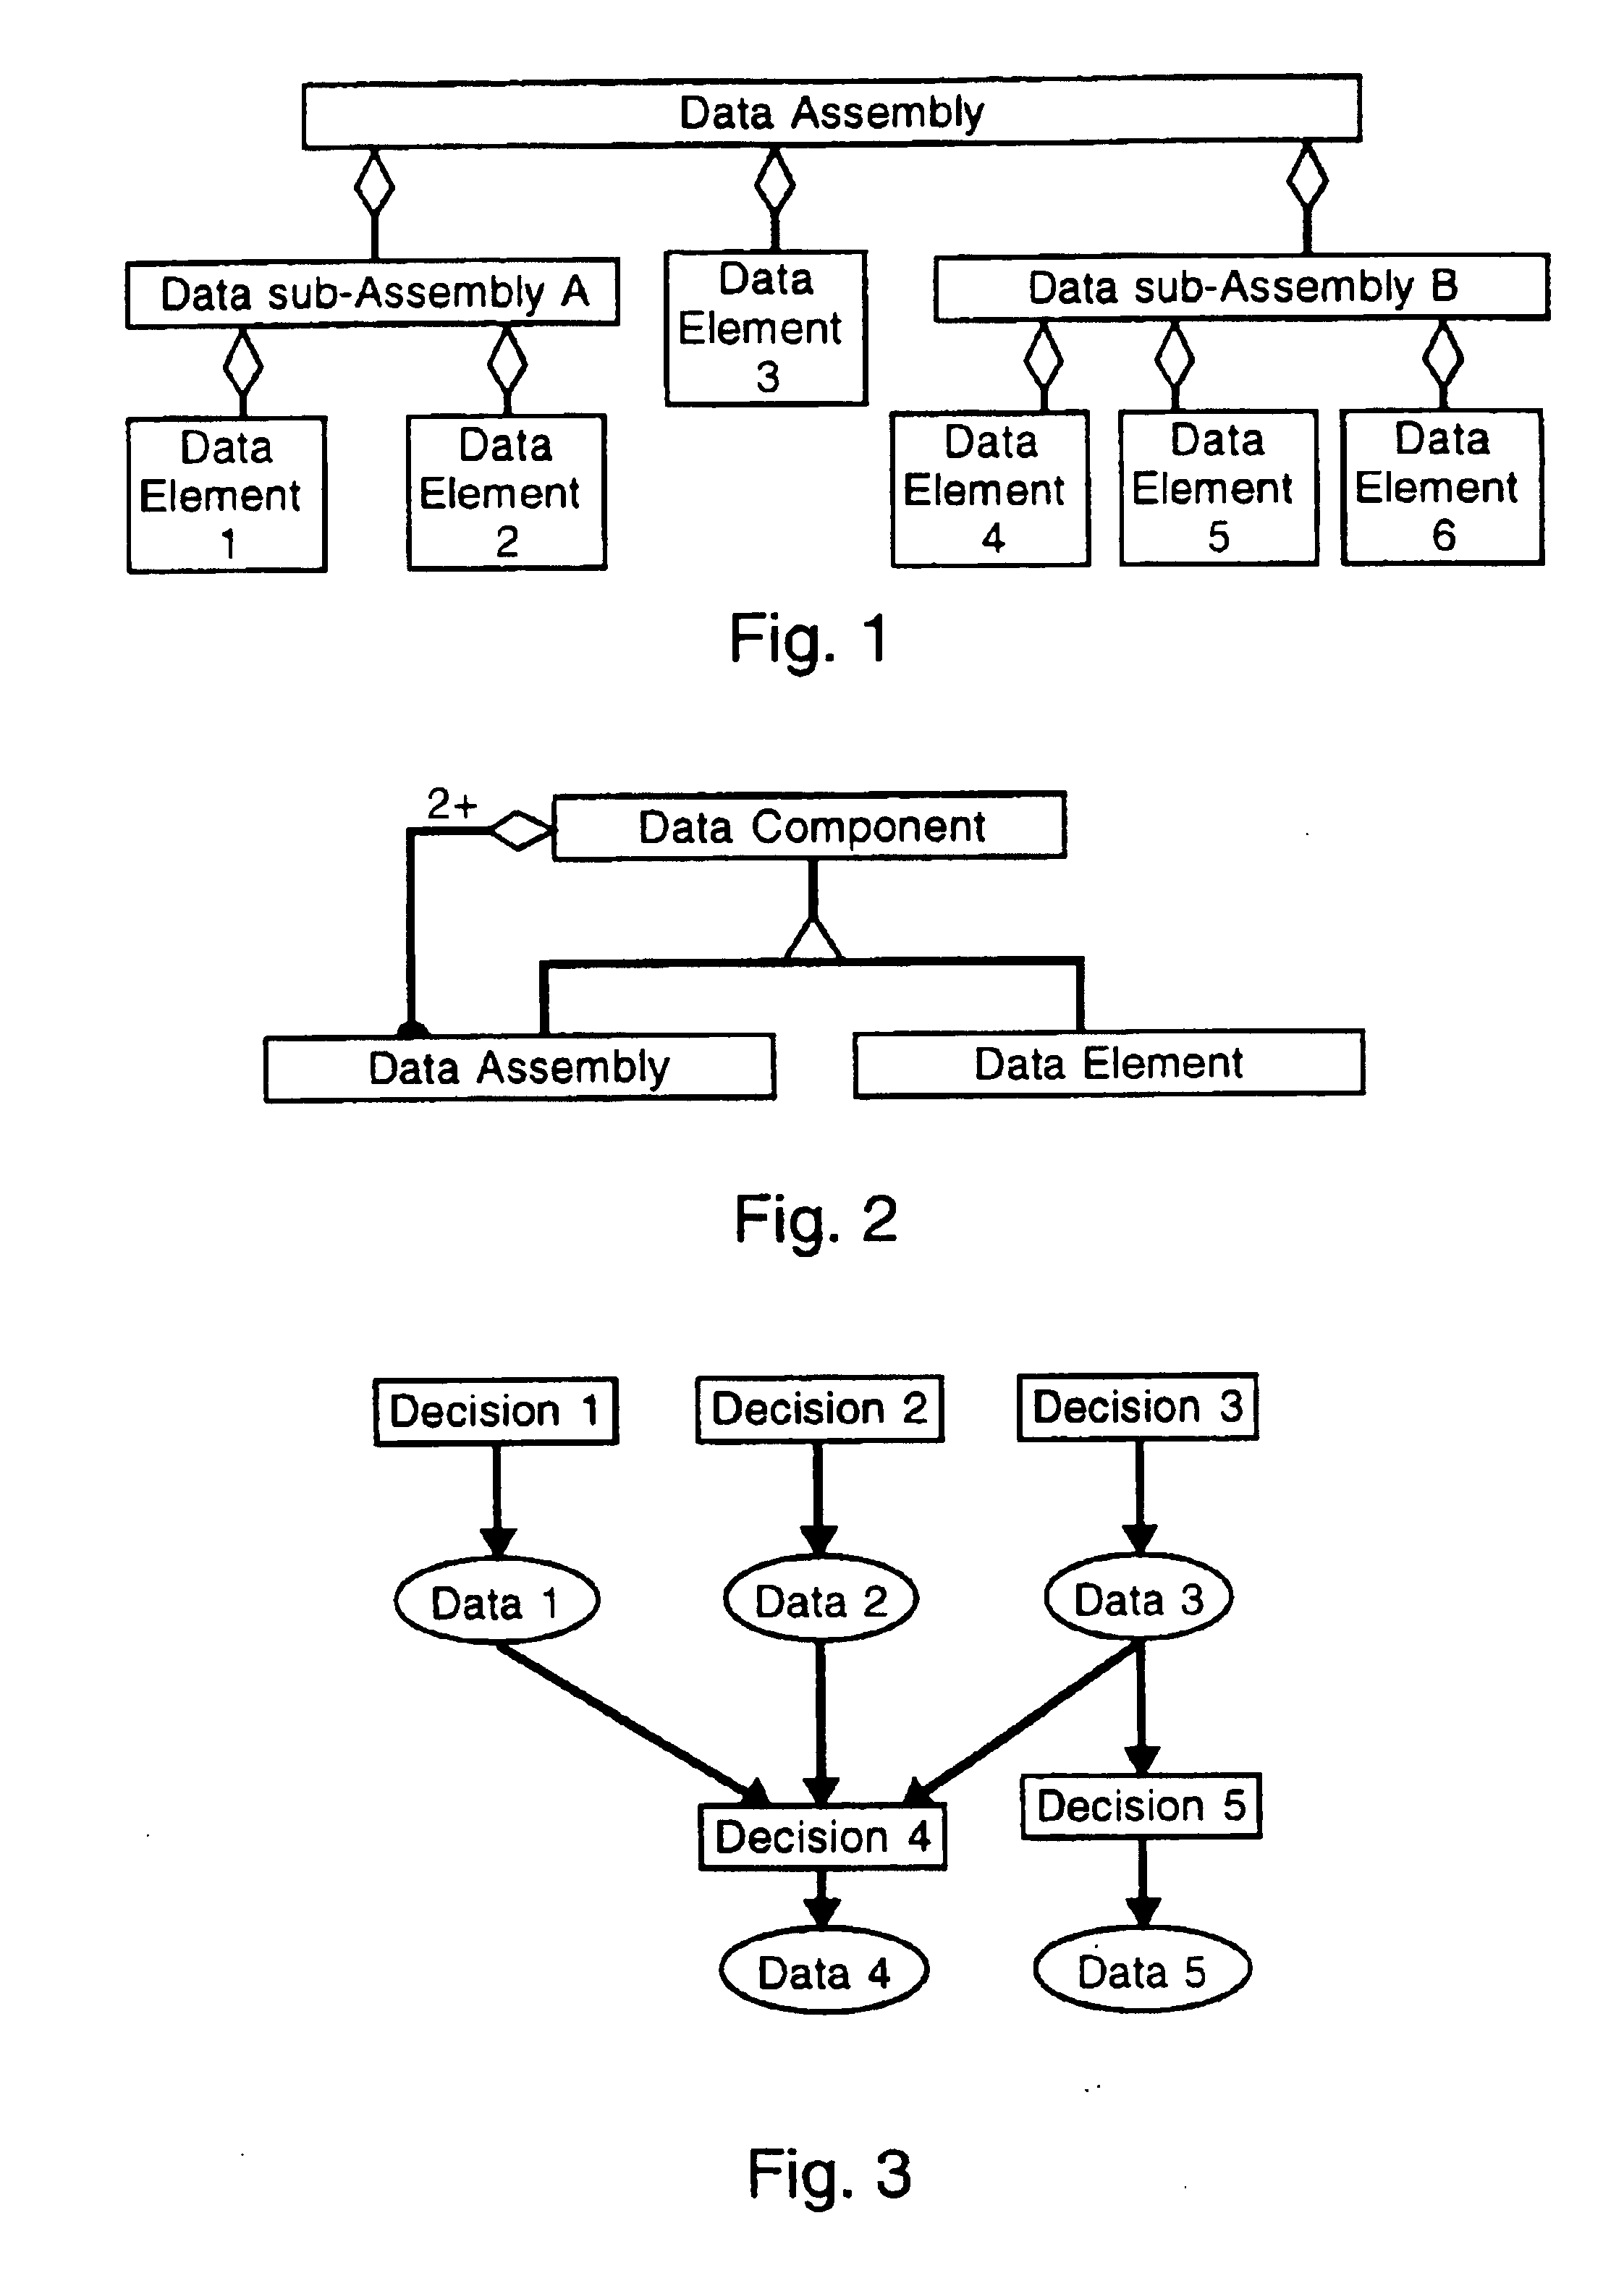 Computer-based system for work processes that consist of interdependent decisions involving one or more participants